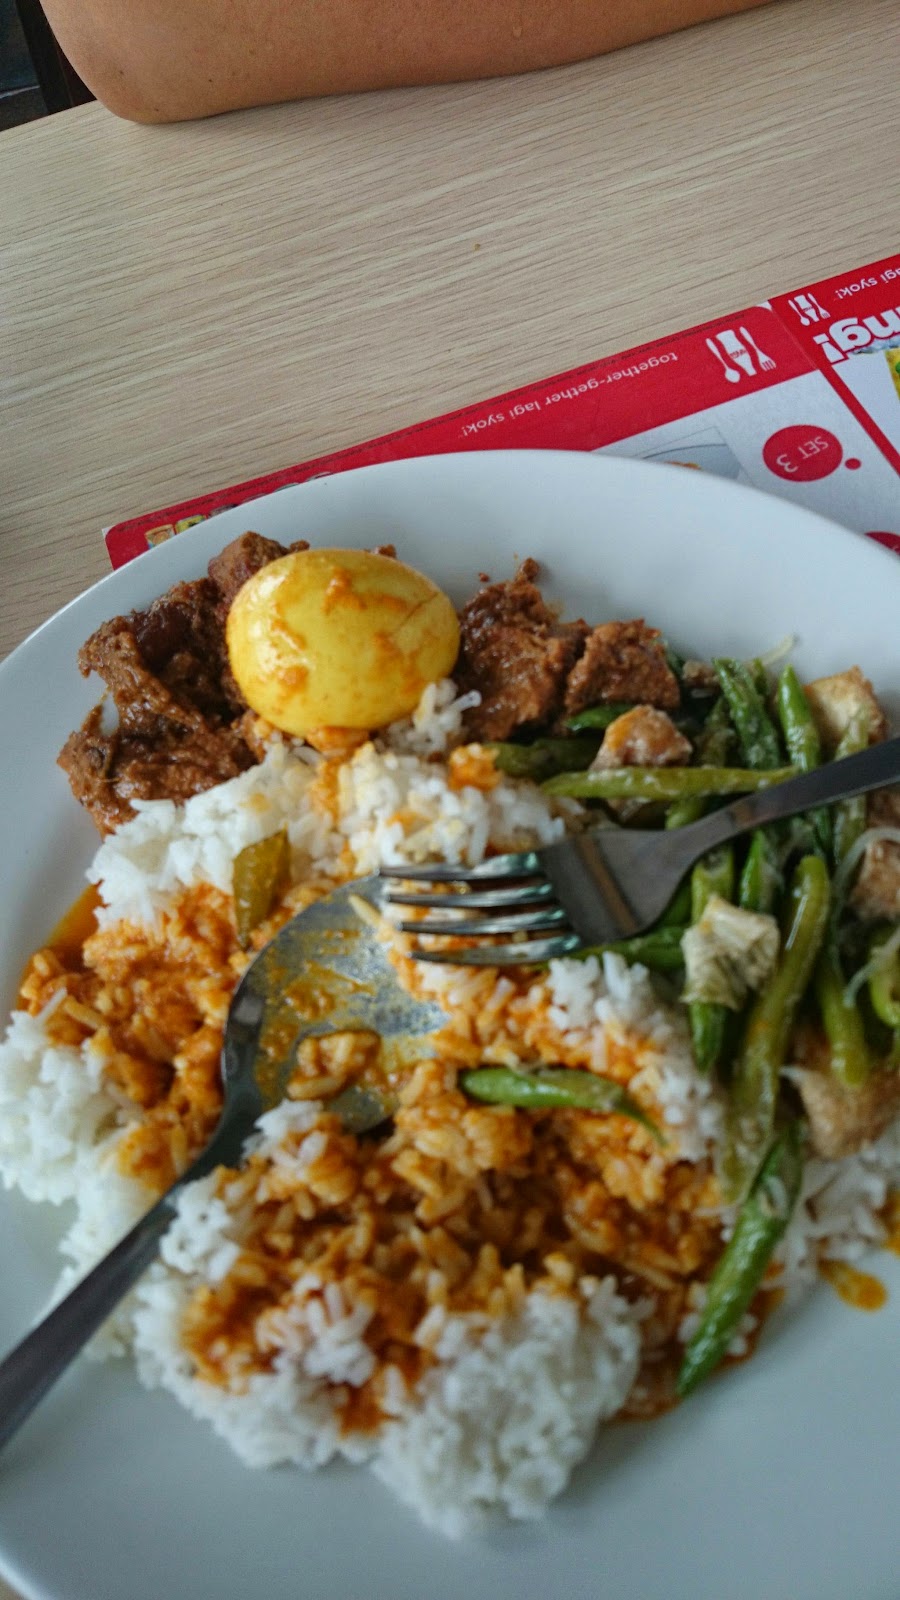 Phyo's Blog: Lunch at JB